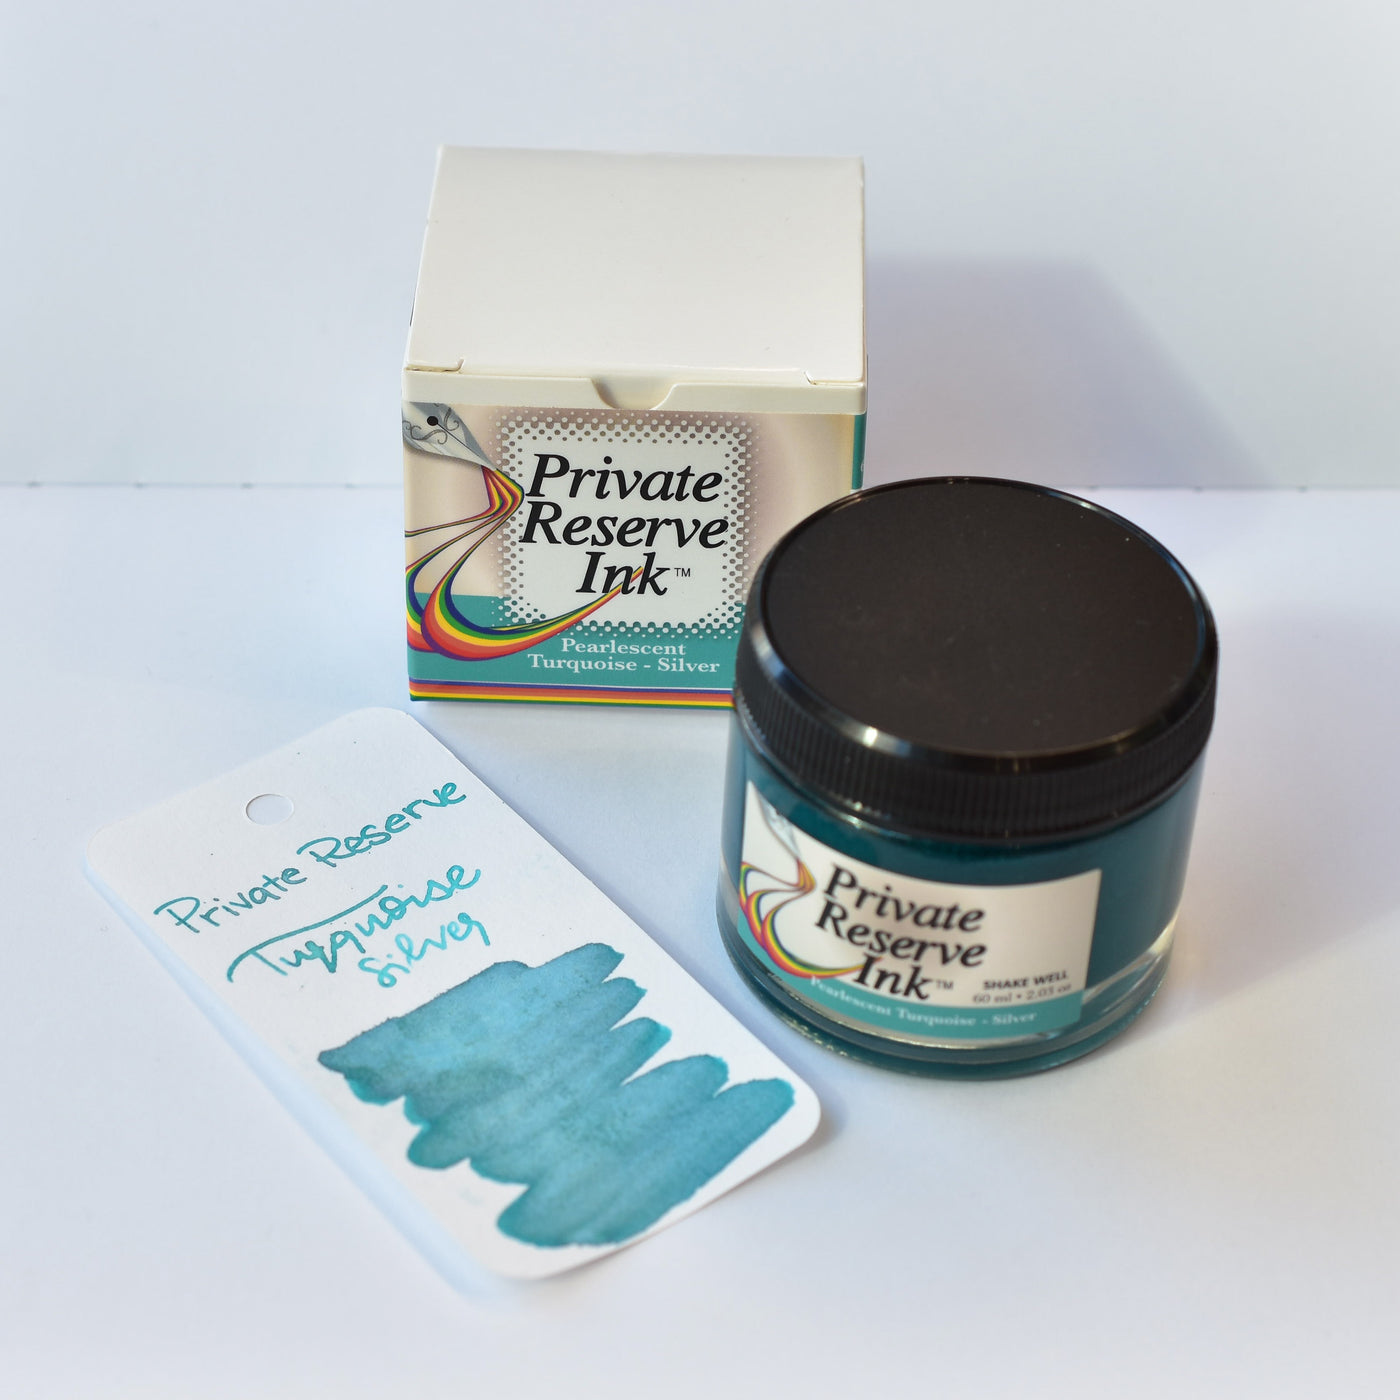 Private Reserve Pearlescent Turquoise Silver Ink Bottle